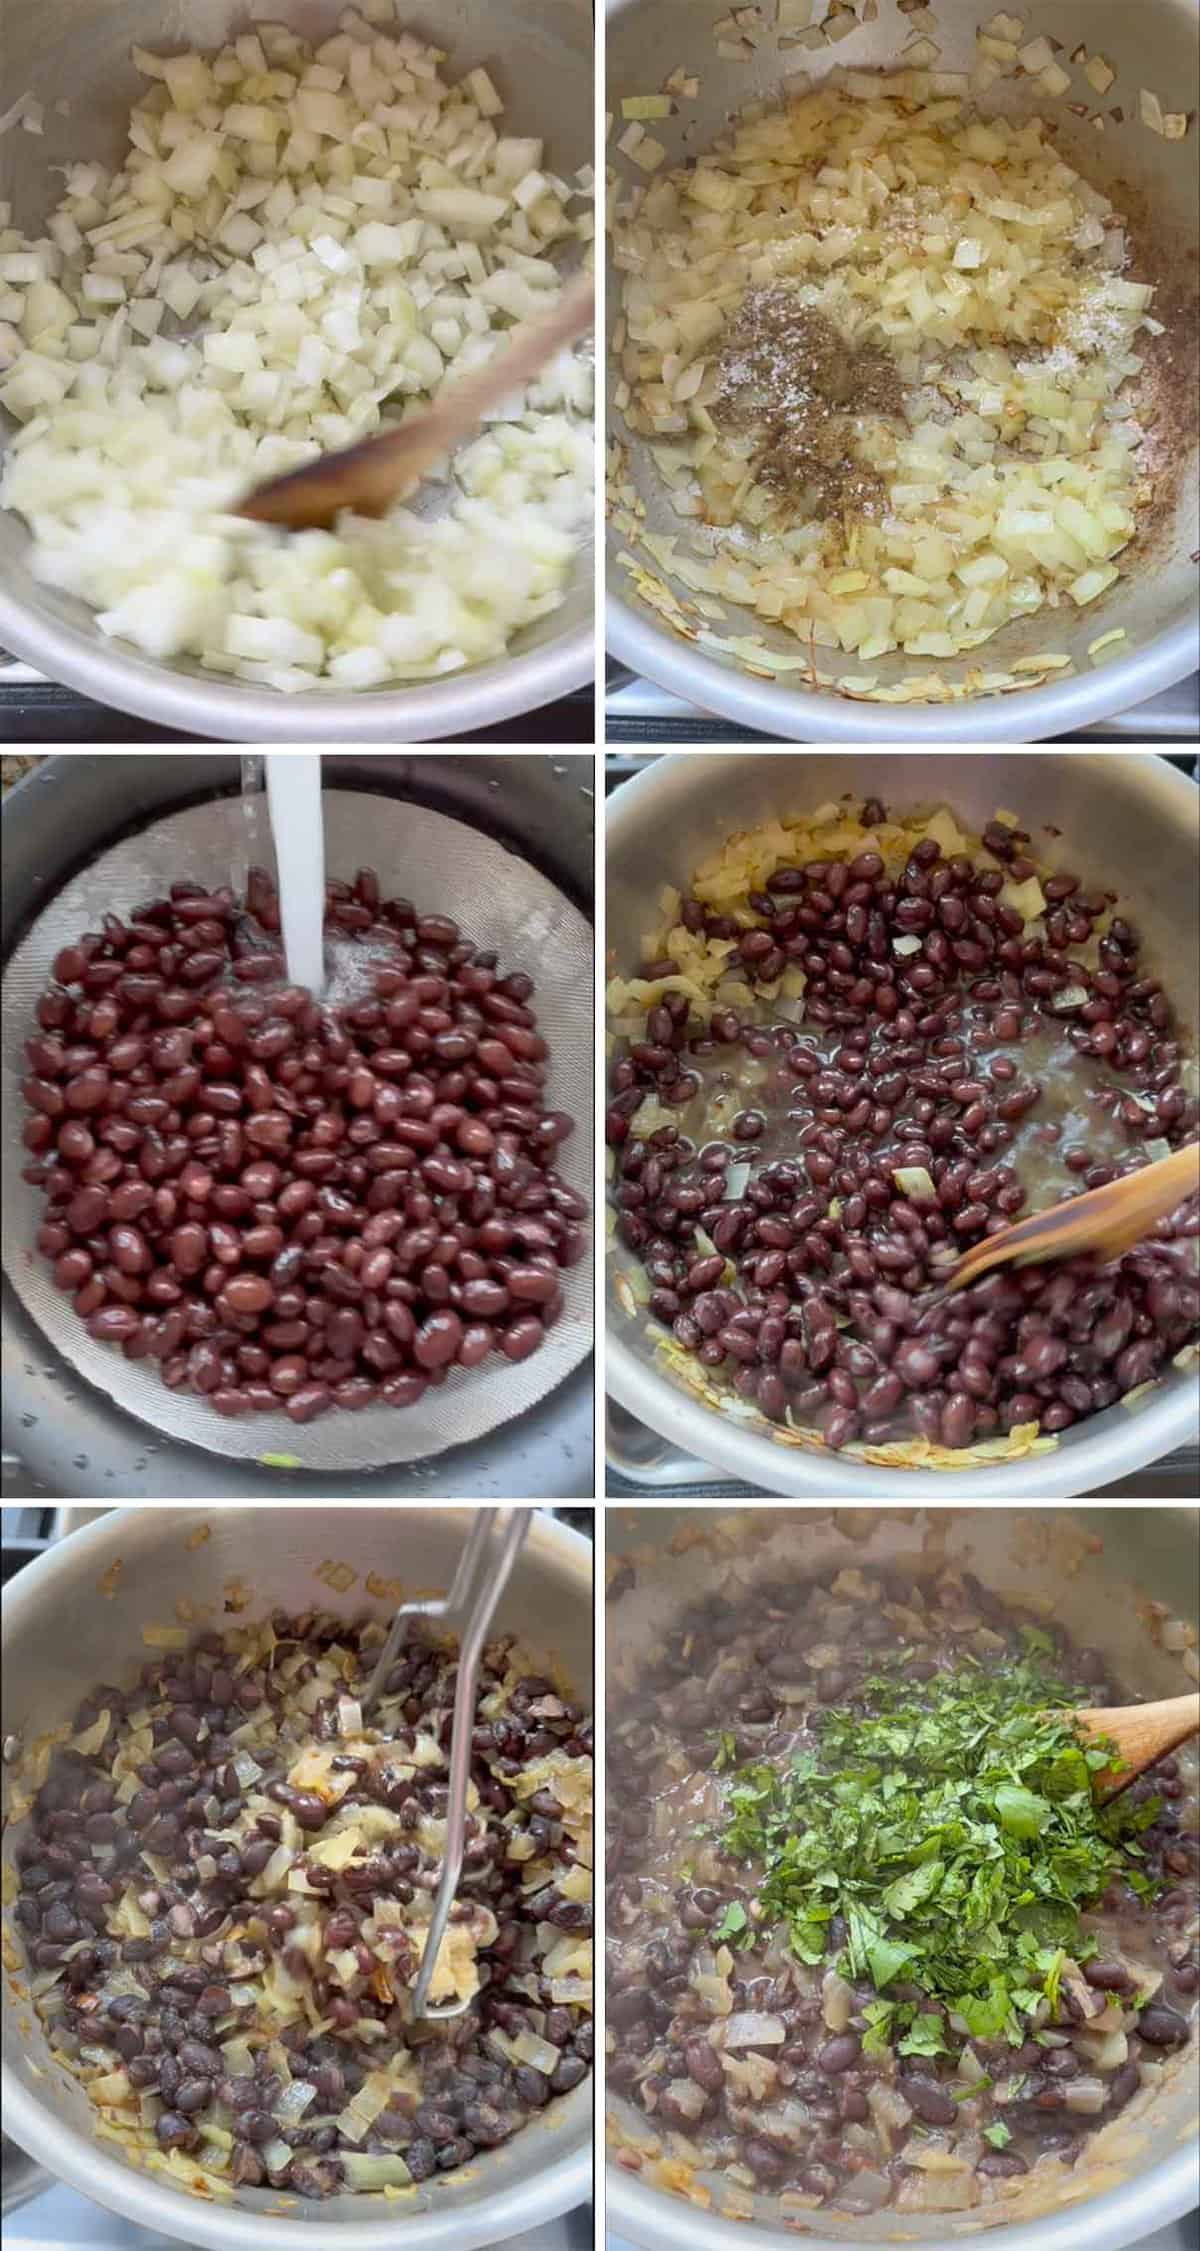 Process collage showing how to make simple black beans from canned beans in a pot with onions, cilantro, lime, and spice.